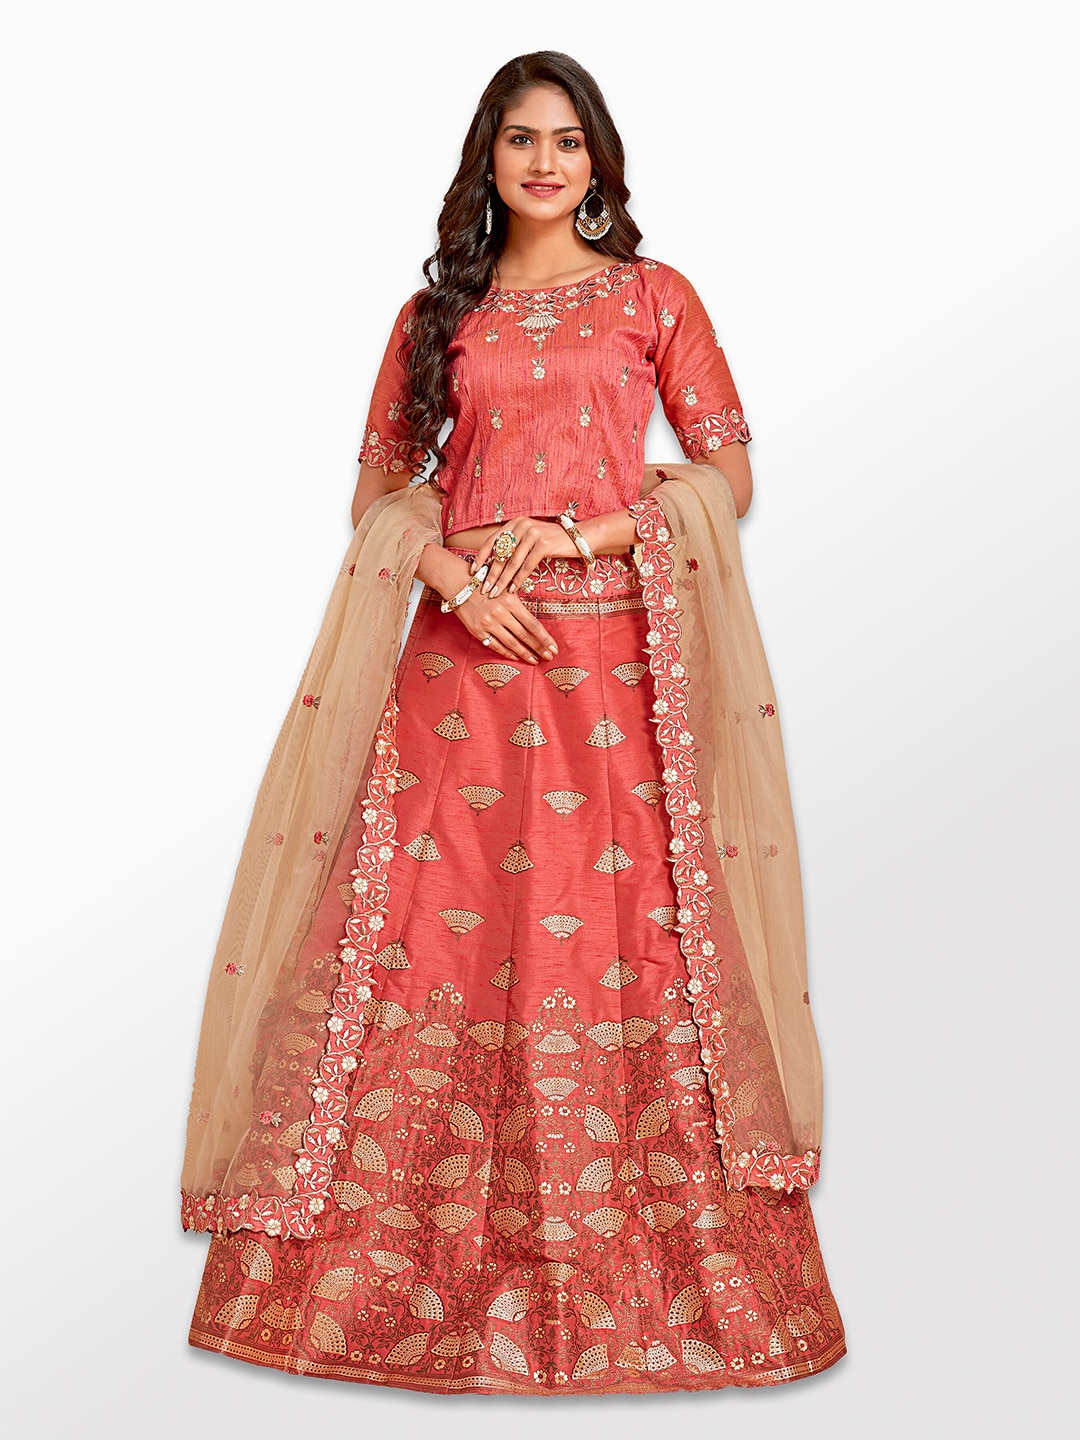 MIMOSA Peach-Coloured & Gold-Toned Semi-Stitched Lehenga & Unstitched Blouse With Dupatta Price in India